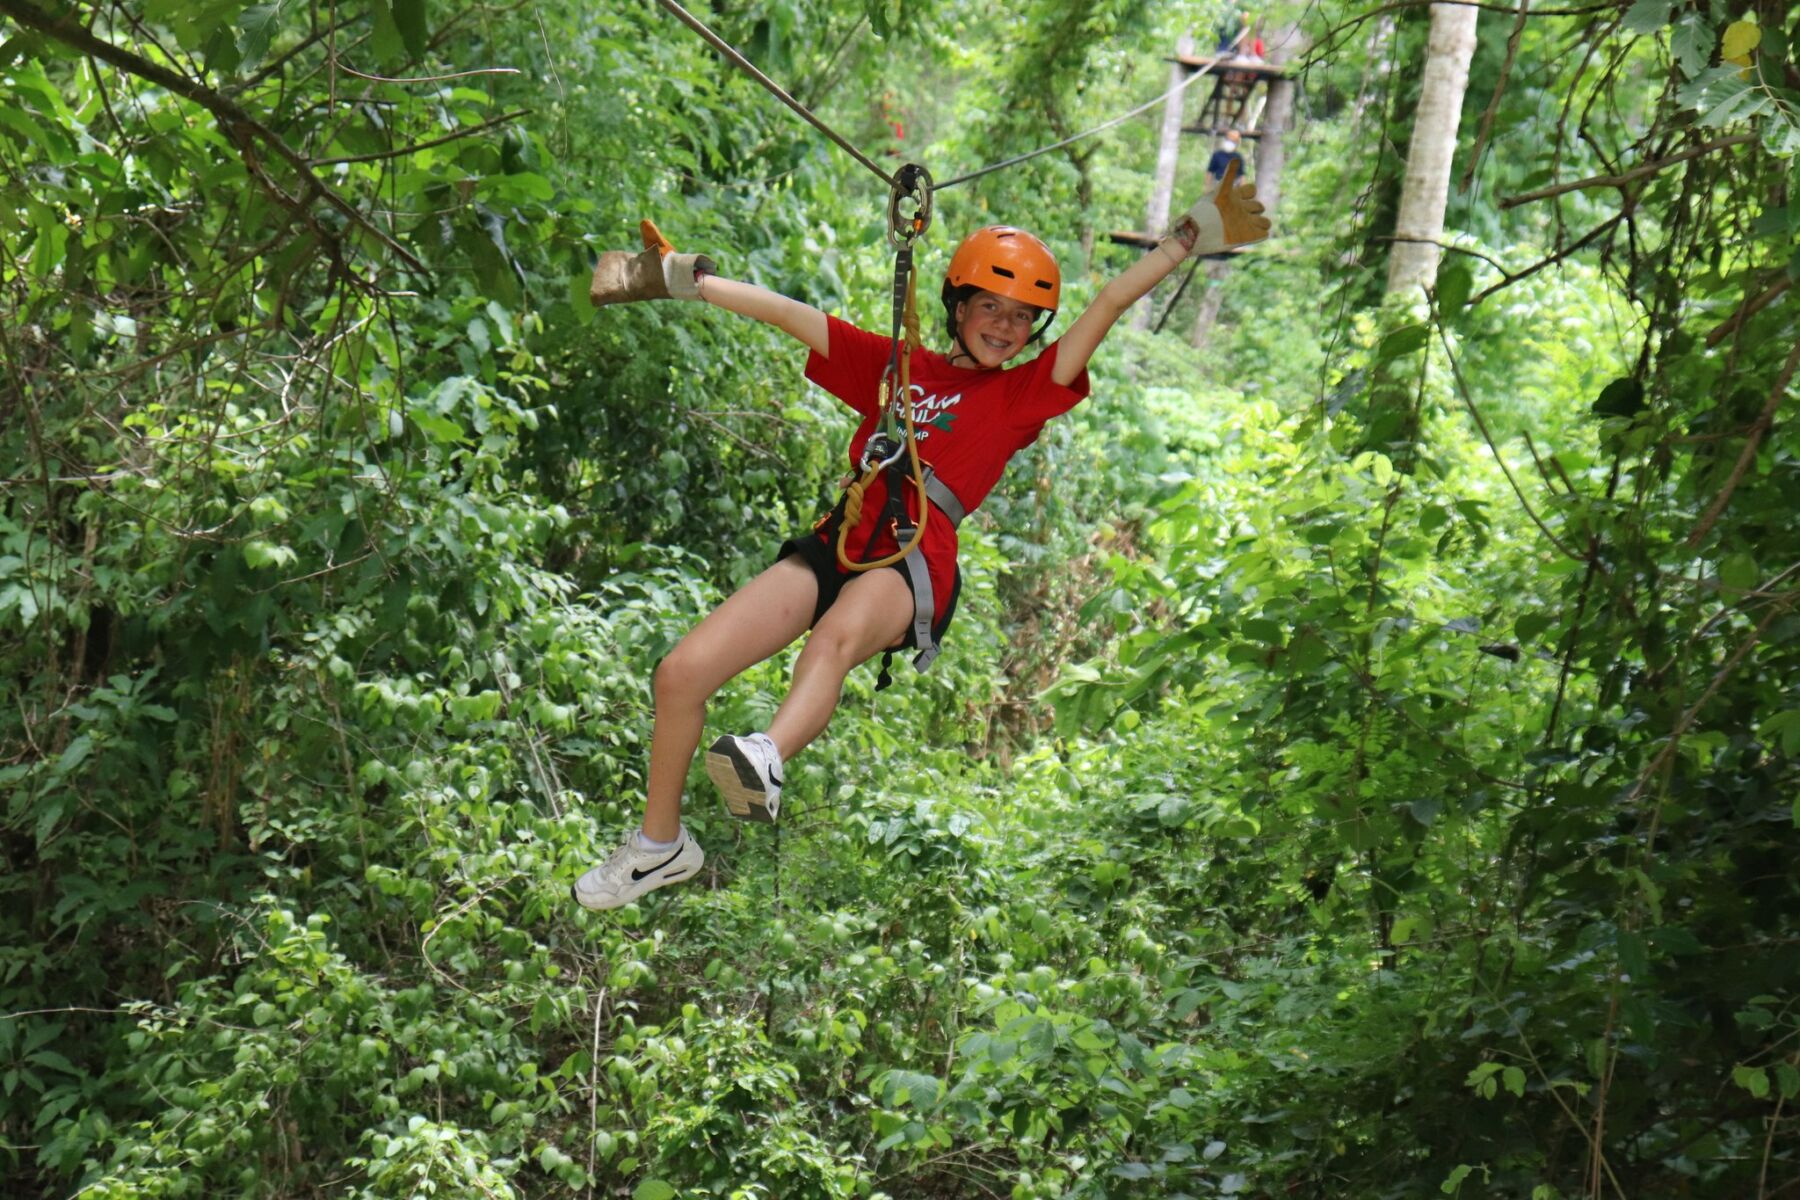 A kid wearing red t-shirt smiling while zip lining through the forest during summer camp at iCamp Thailand.